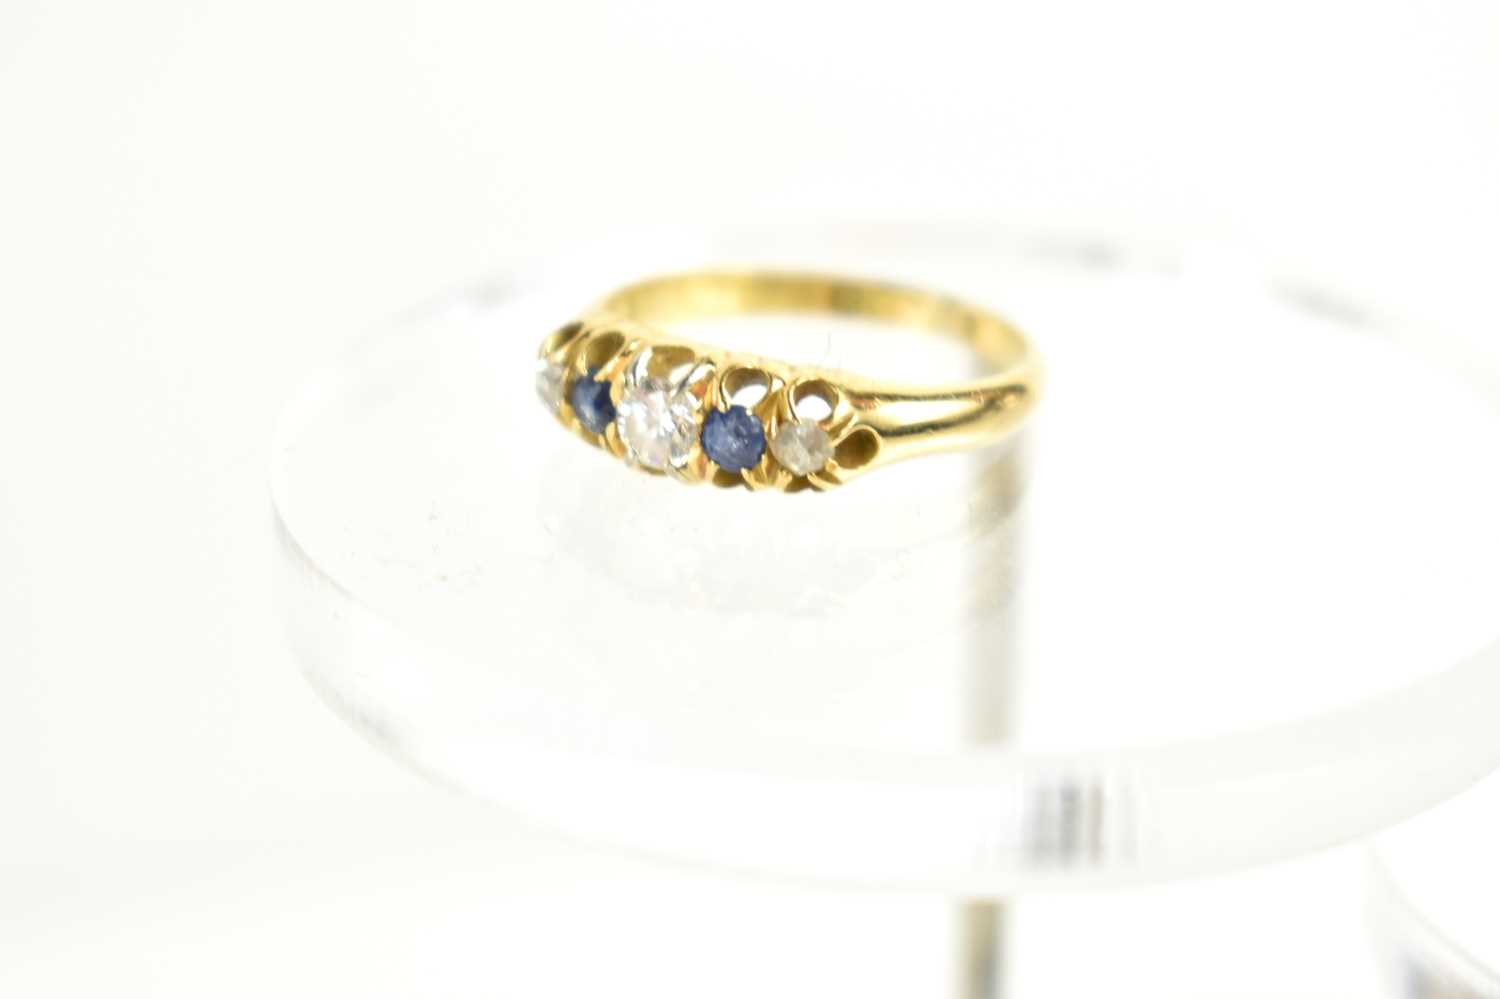 An 18ct gold, diamond and sapphire five stone ring, the central, largest diamond of approximately - Image 2 of 3